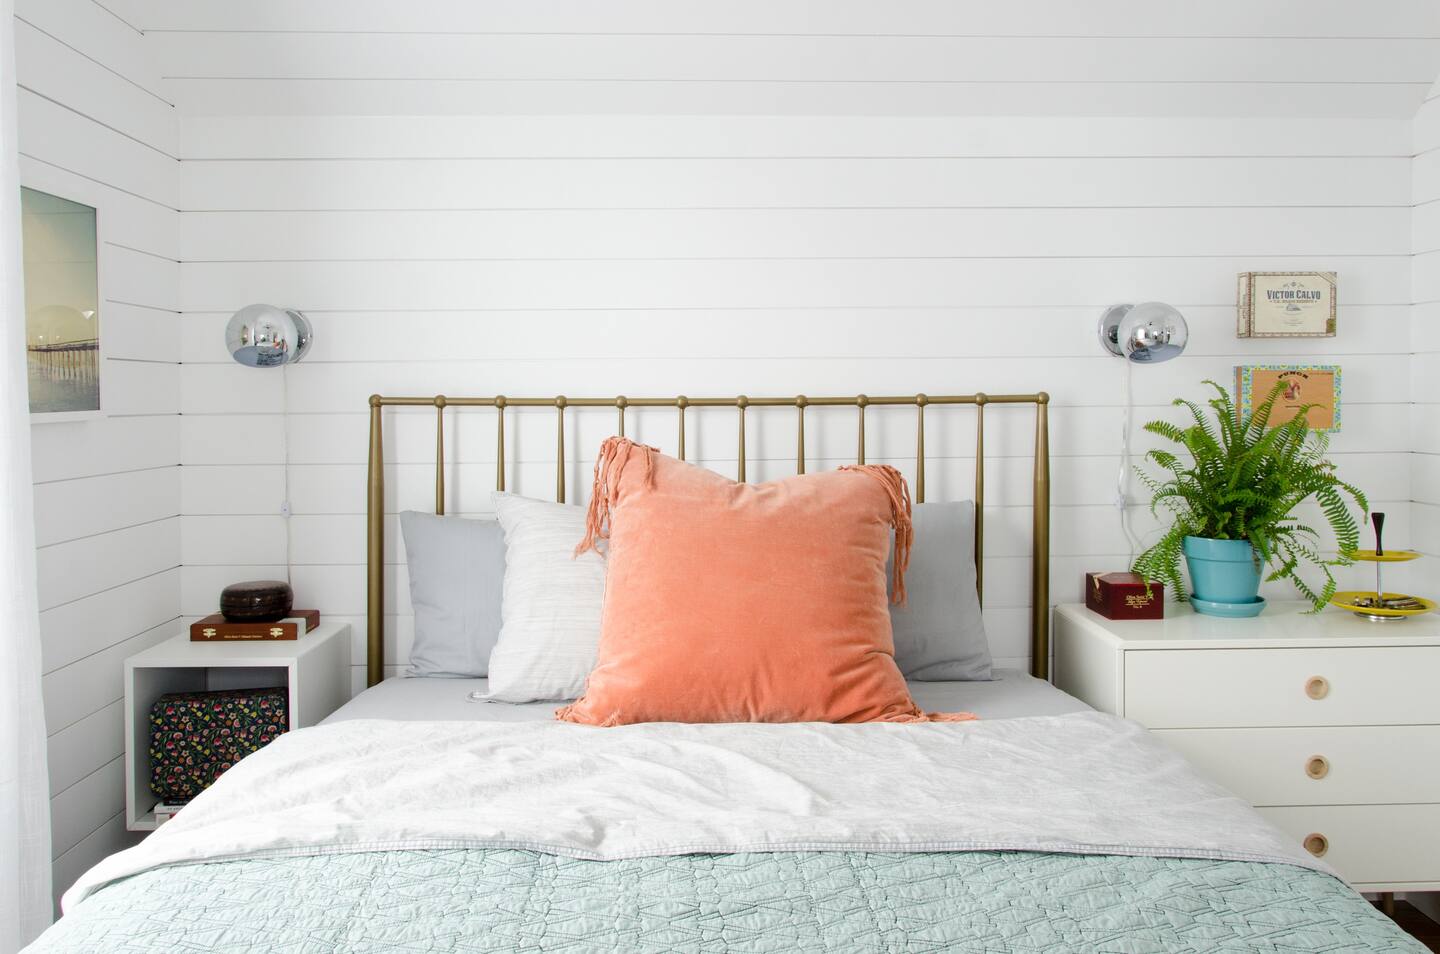 Cozy bed in the middle of small bedroom with a great pillow in the color of peach